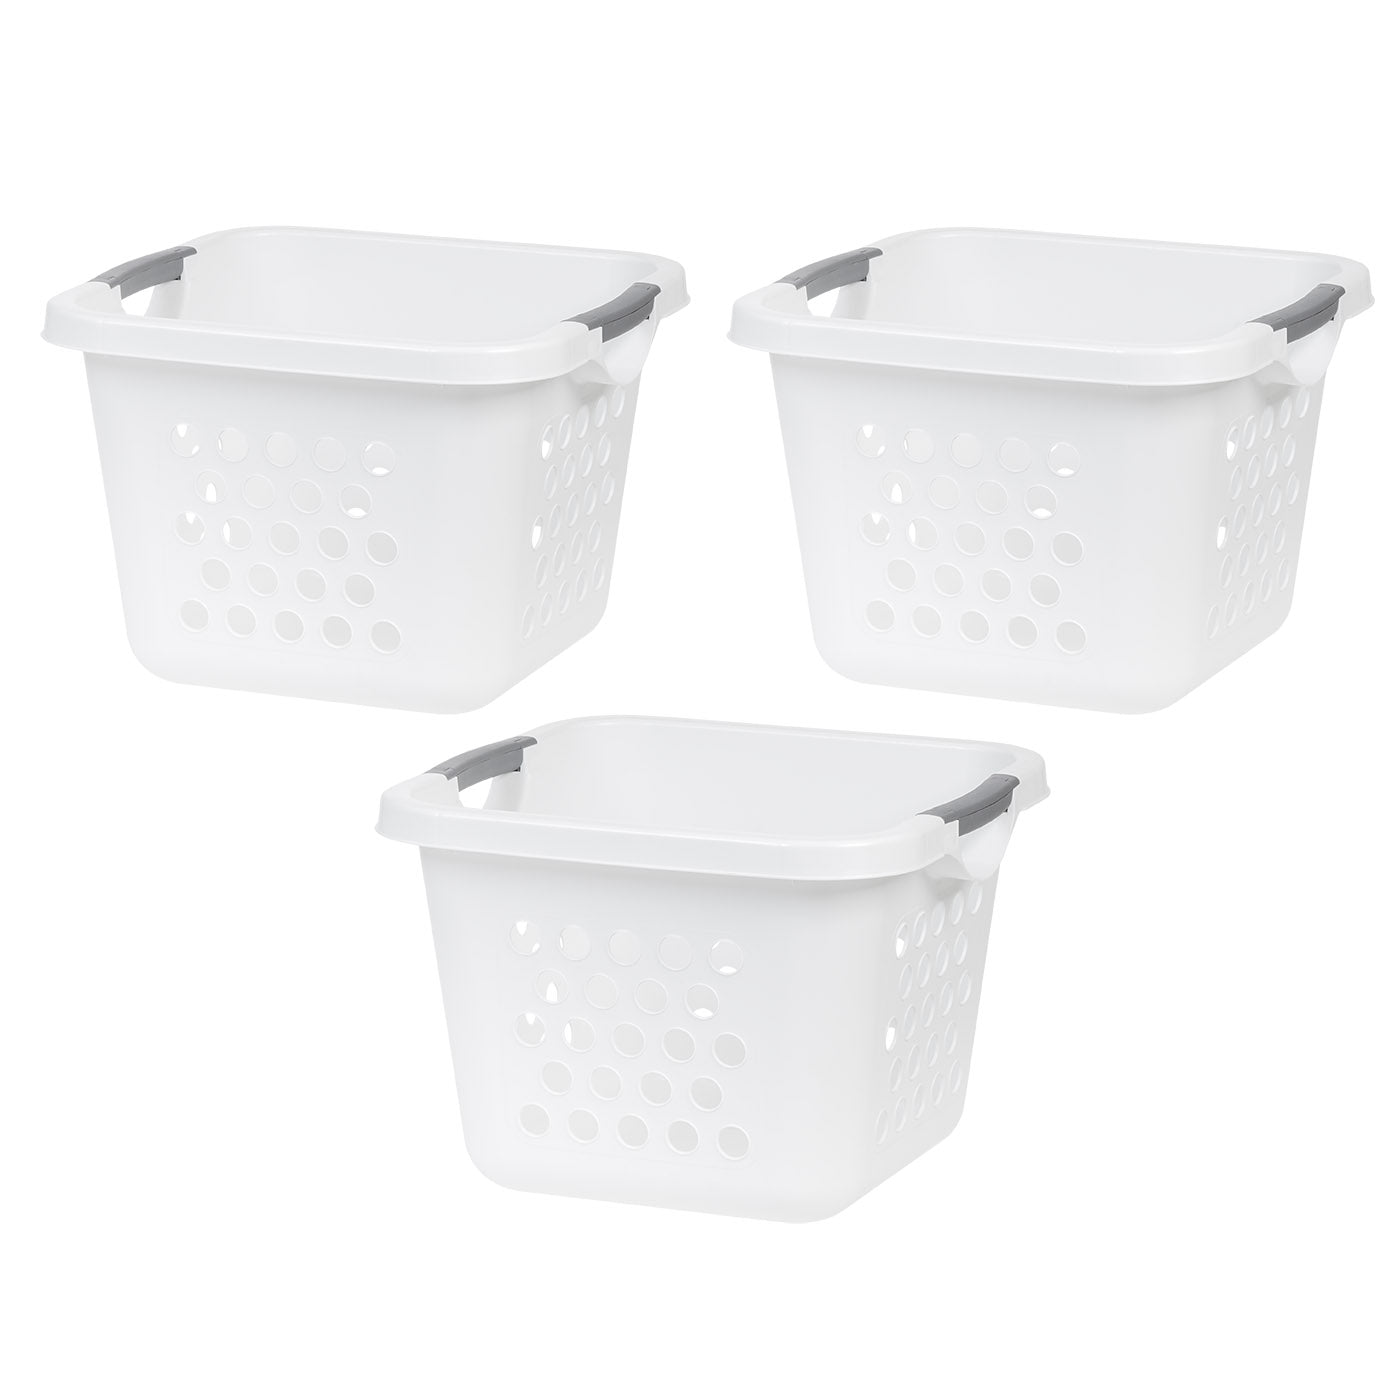 Iris 30 L Compact Laundry Basket and Hamper Plastic Storage Basket or Organizer with Easy Lift Handles (3-pack)